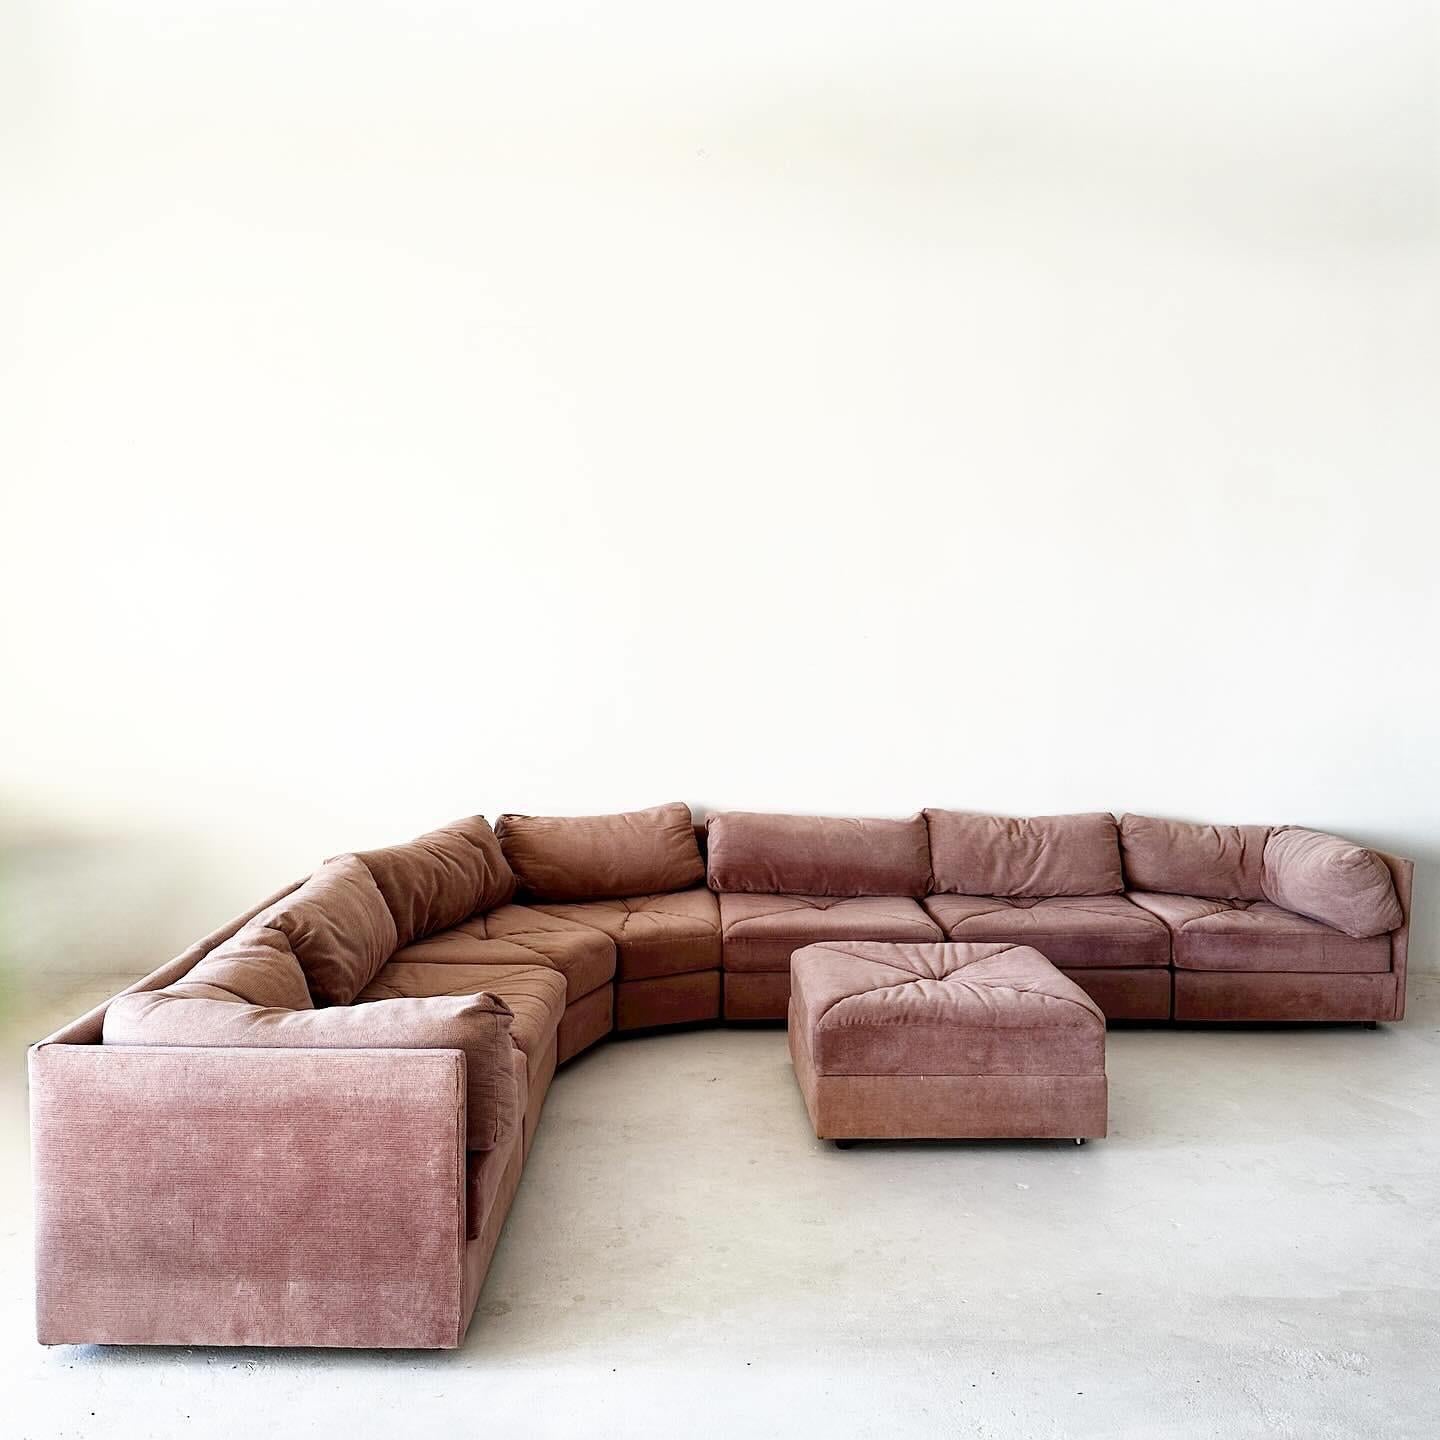 vintage 8-piece modular sectional with original mauve tweed upholstery.

similar to a playpen, unique 1970s design includes 2 corner pieces, 1 ottoman, 3 armless pieces, and 2 triangular pieces that allow for maximum customization -- 20+ 8-piece